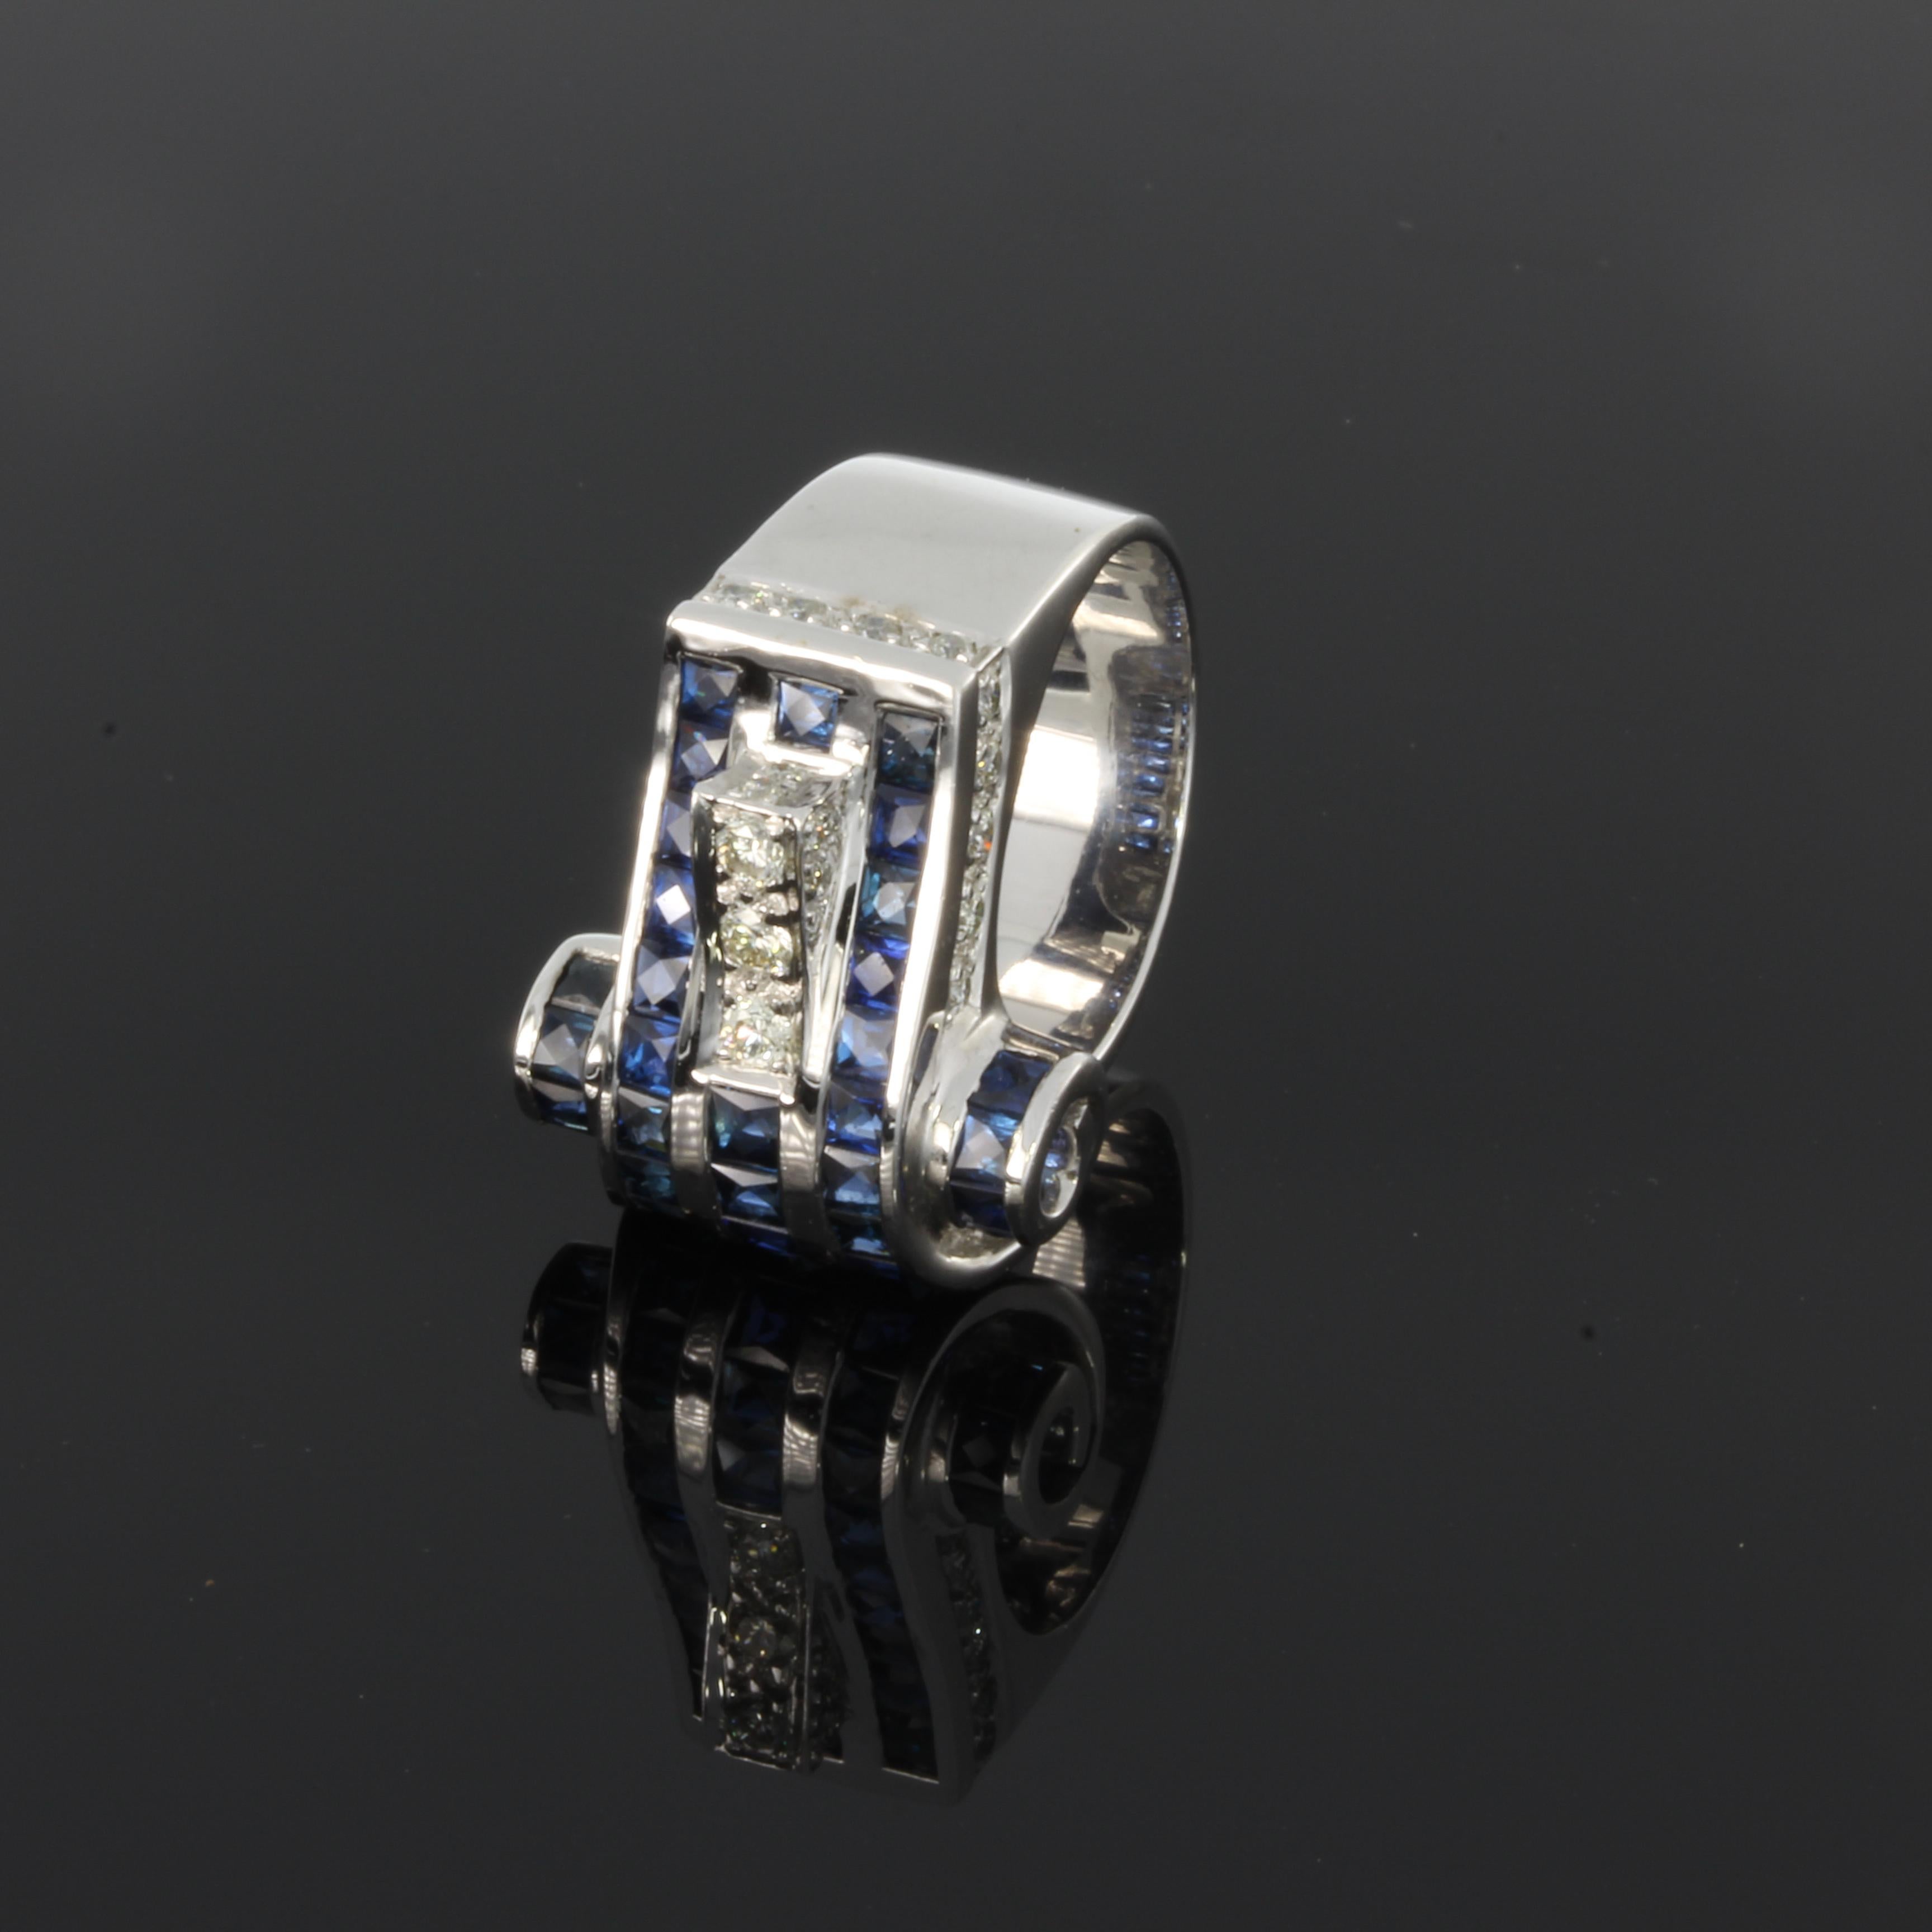 Set with 3 brilliant-cut diamonds with a total weight of 0,30 carat and 36 sapphires weighing circa 3,40 ct. 
Mounted in 18 carat white gold. Marked with the purity 18K. Weight: 18,12 grams. Ring size: 55 ( US 7 ). Resizable.

